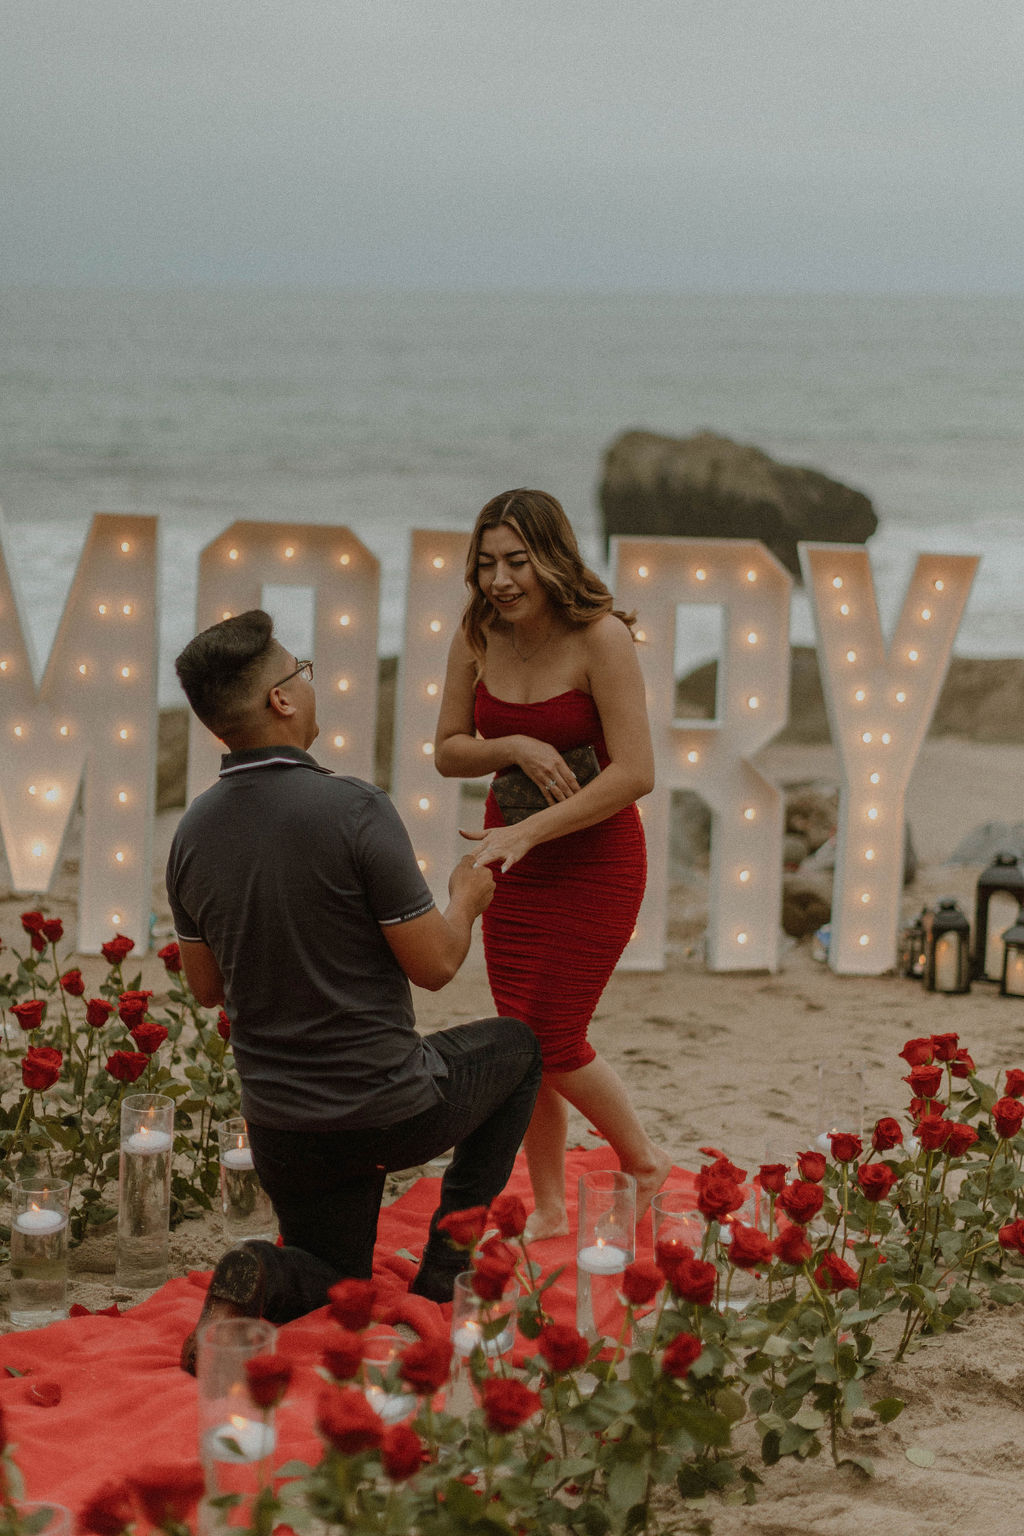 the couple on the beach during their proposal